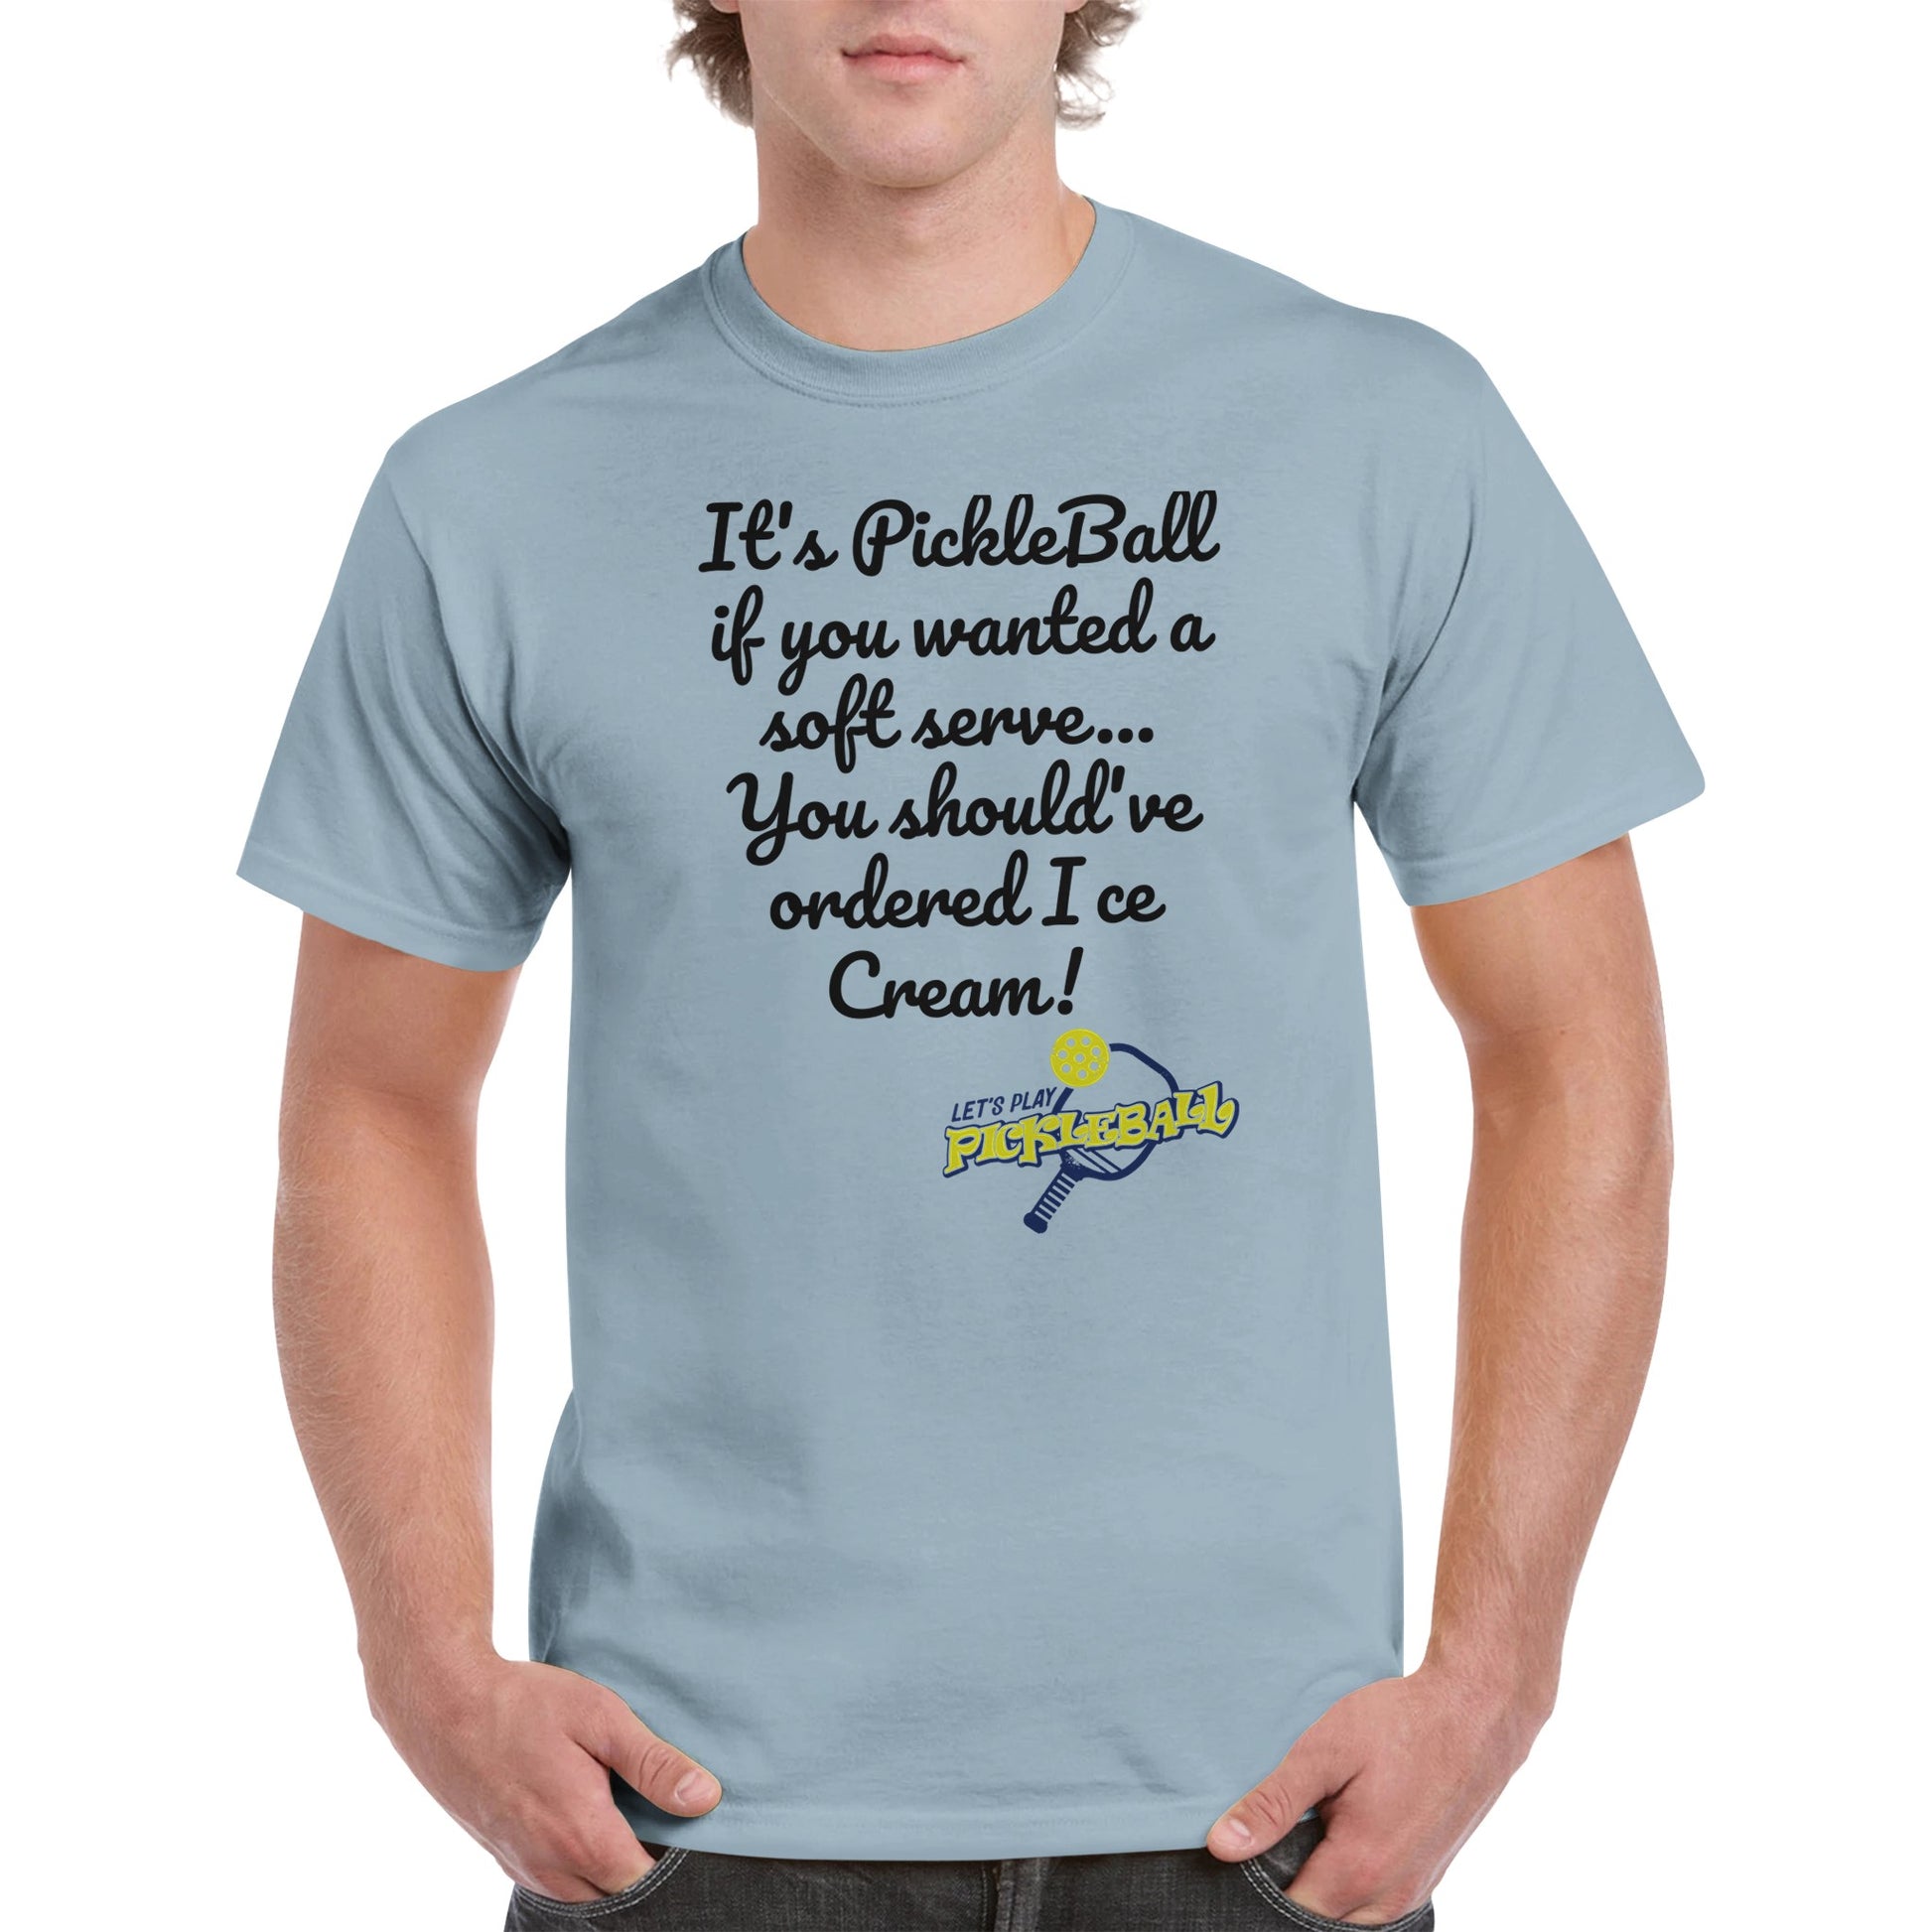 Light Blue comfortable Unisex Crewneck heavyweight cotton t-shirt with funny saying It’s PickleBall if you wanted a soft serve… You should’ve ordered Ice Cream! and Let’s Play Pickleball logo on the front from WhatYa Say Apparel worn by blonde-haired male front view.